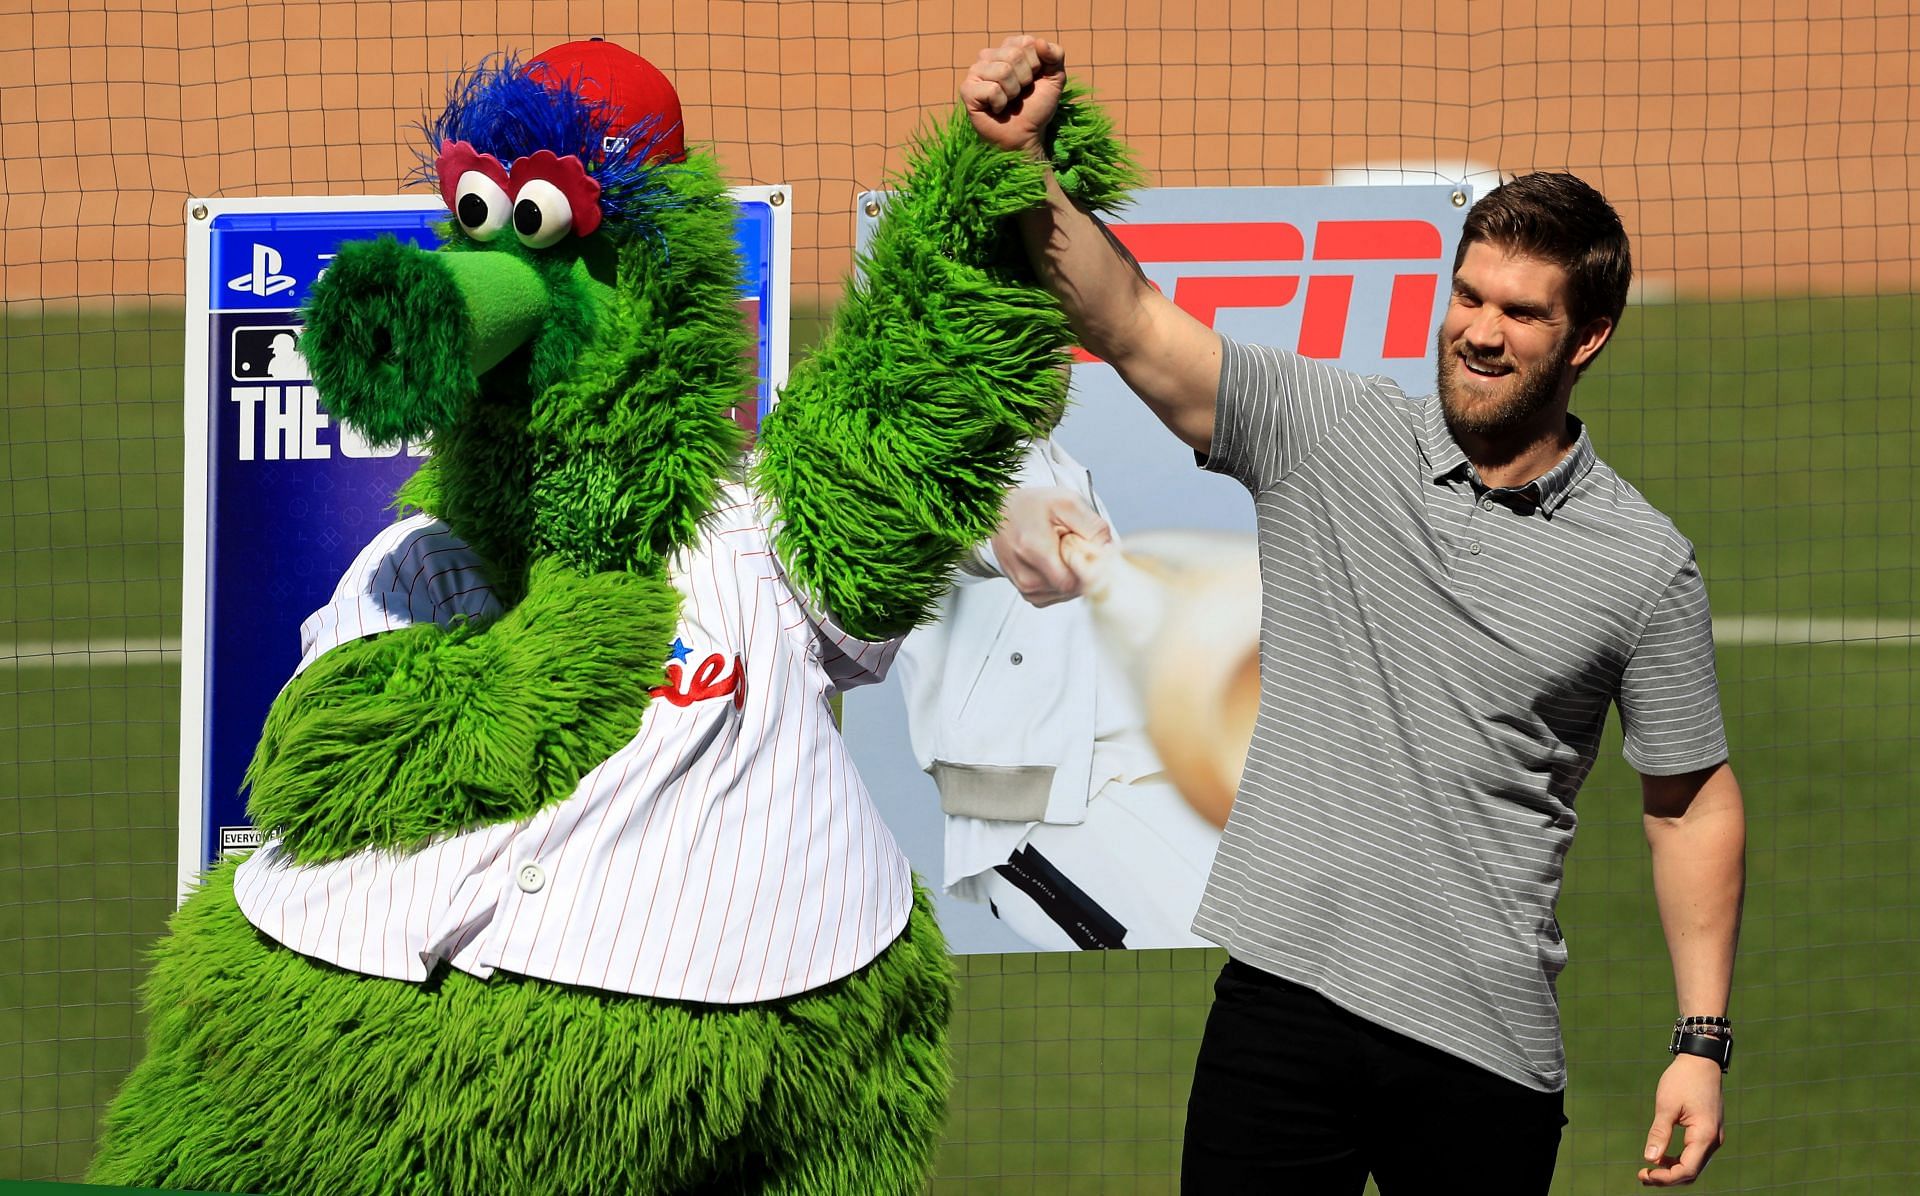 Bryce Harper and the Phillies mascot